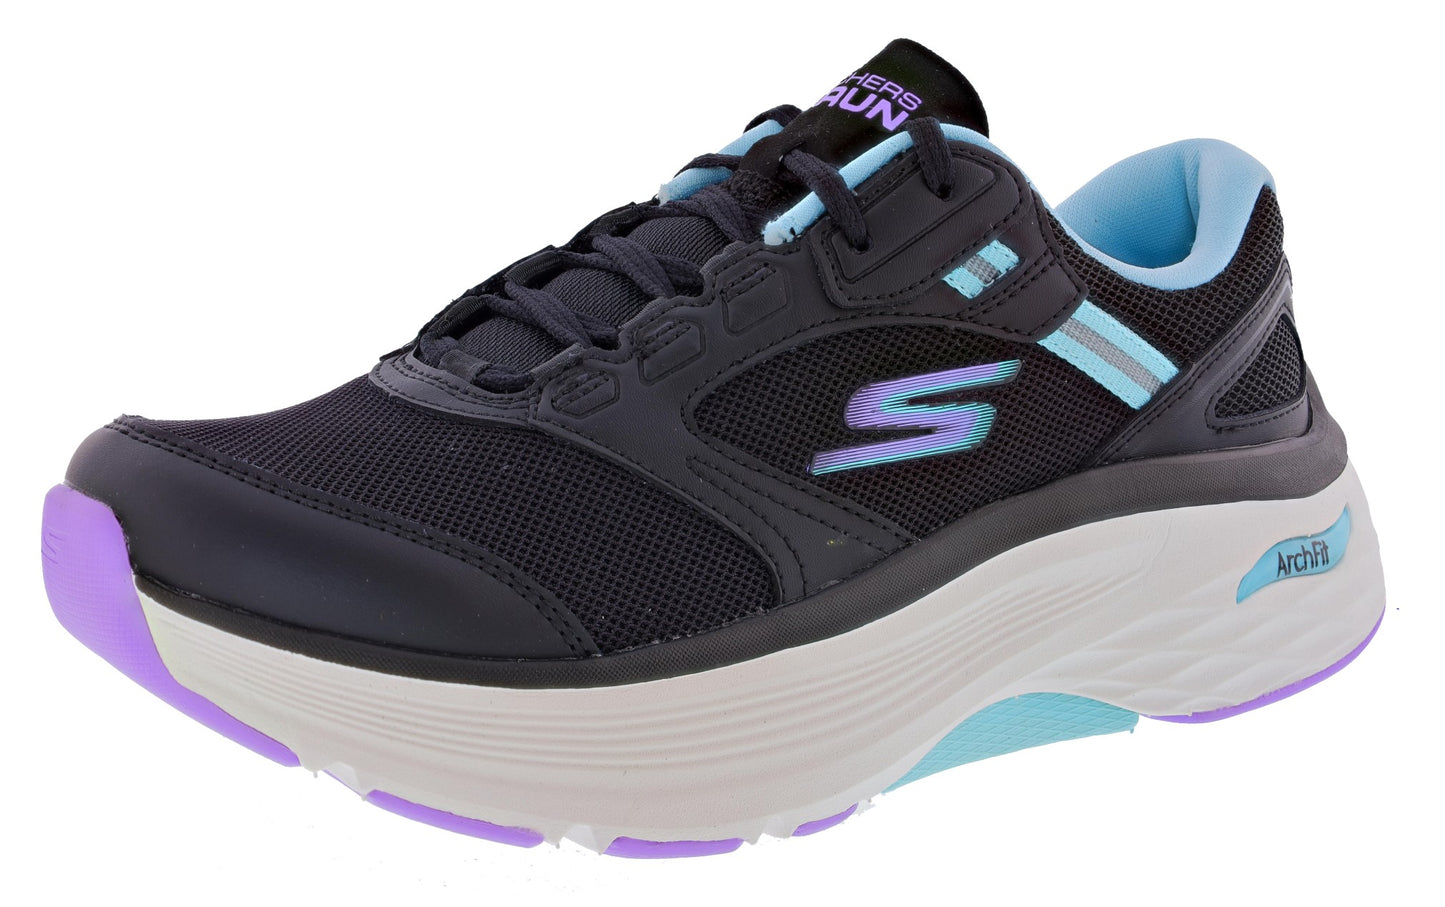 Skechers Max Cushioning Arch Fit Goodyear Performance Walking Shoes Women's